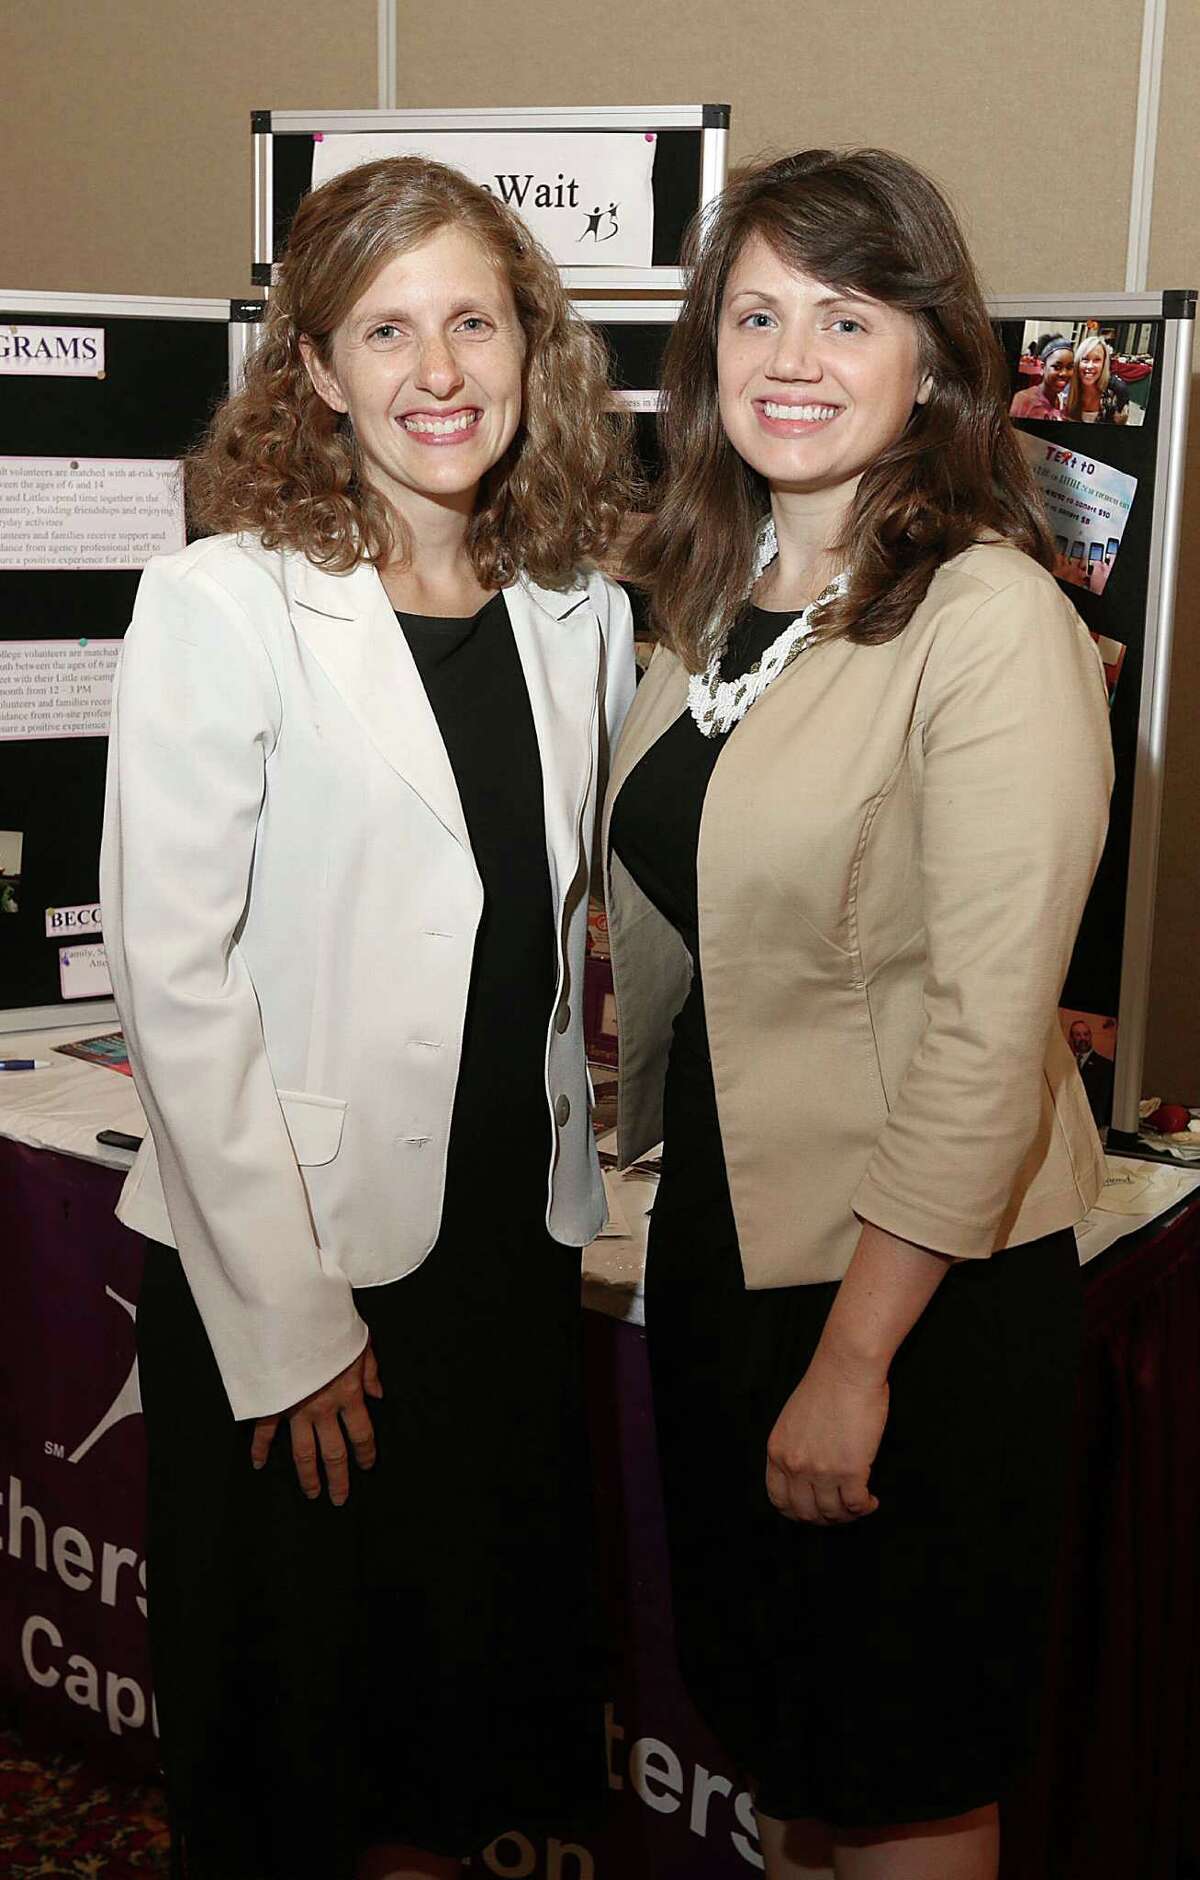 Were you Seen at the Women@Work Connect "Working to Make a Difference" non profit expo and networking event at the Desmond Hotel in Albany on Tuesday, June 30, 2015?